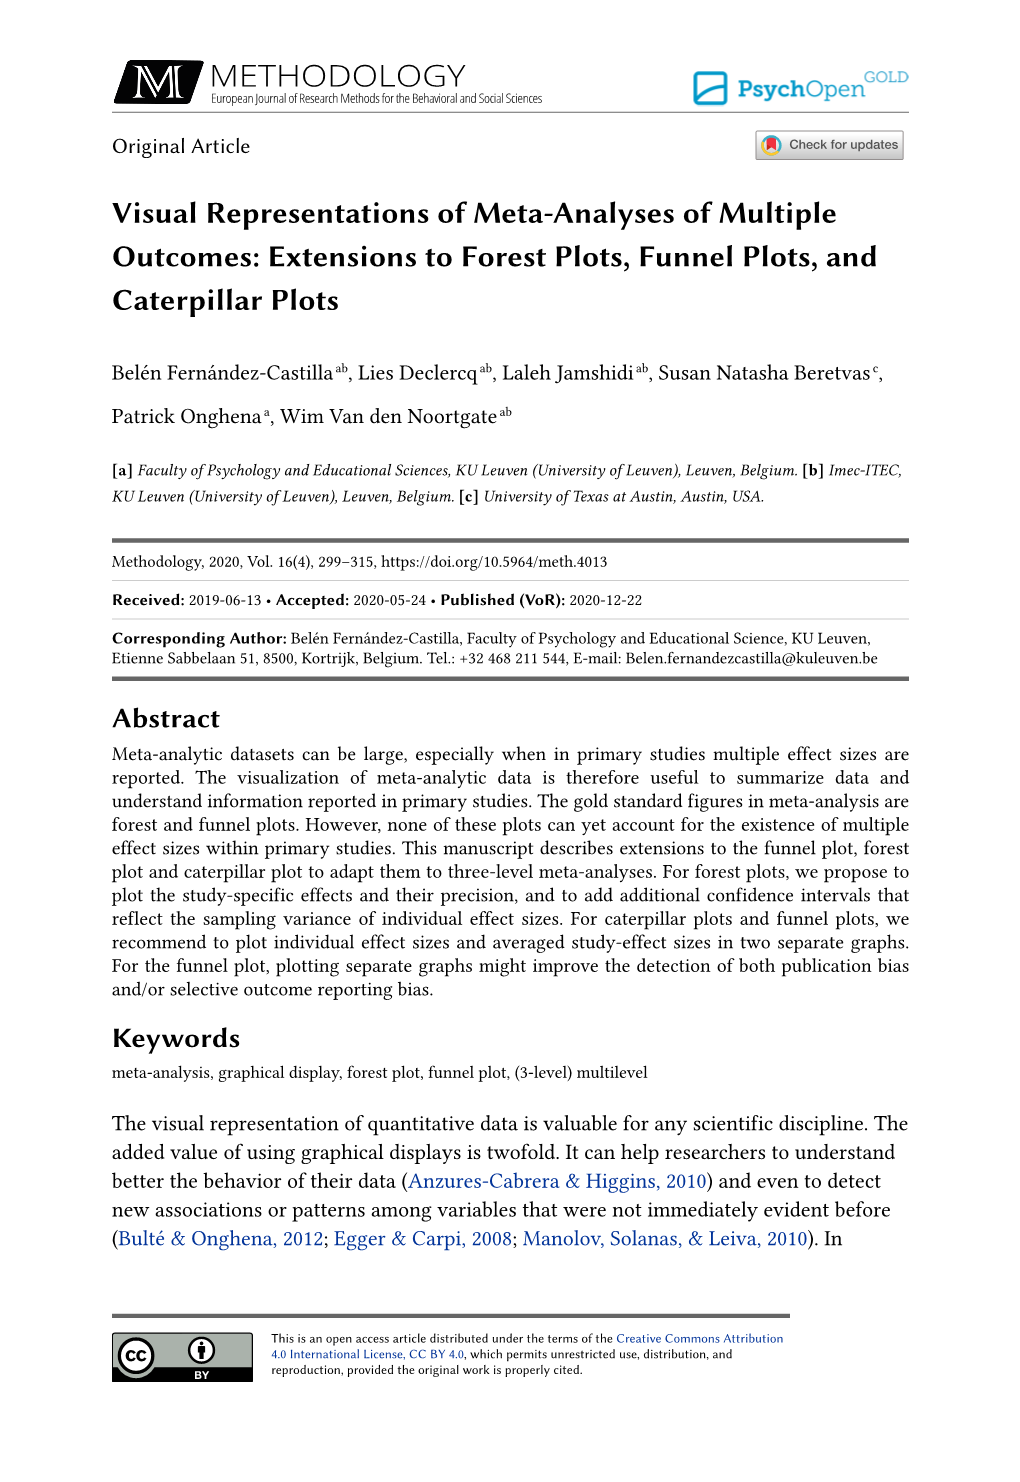 Visual Representations of Meta-Analyses of Multiple Outcomes: Extensions to Forest Plots, Funnel Plots, and Caterpillar Plots